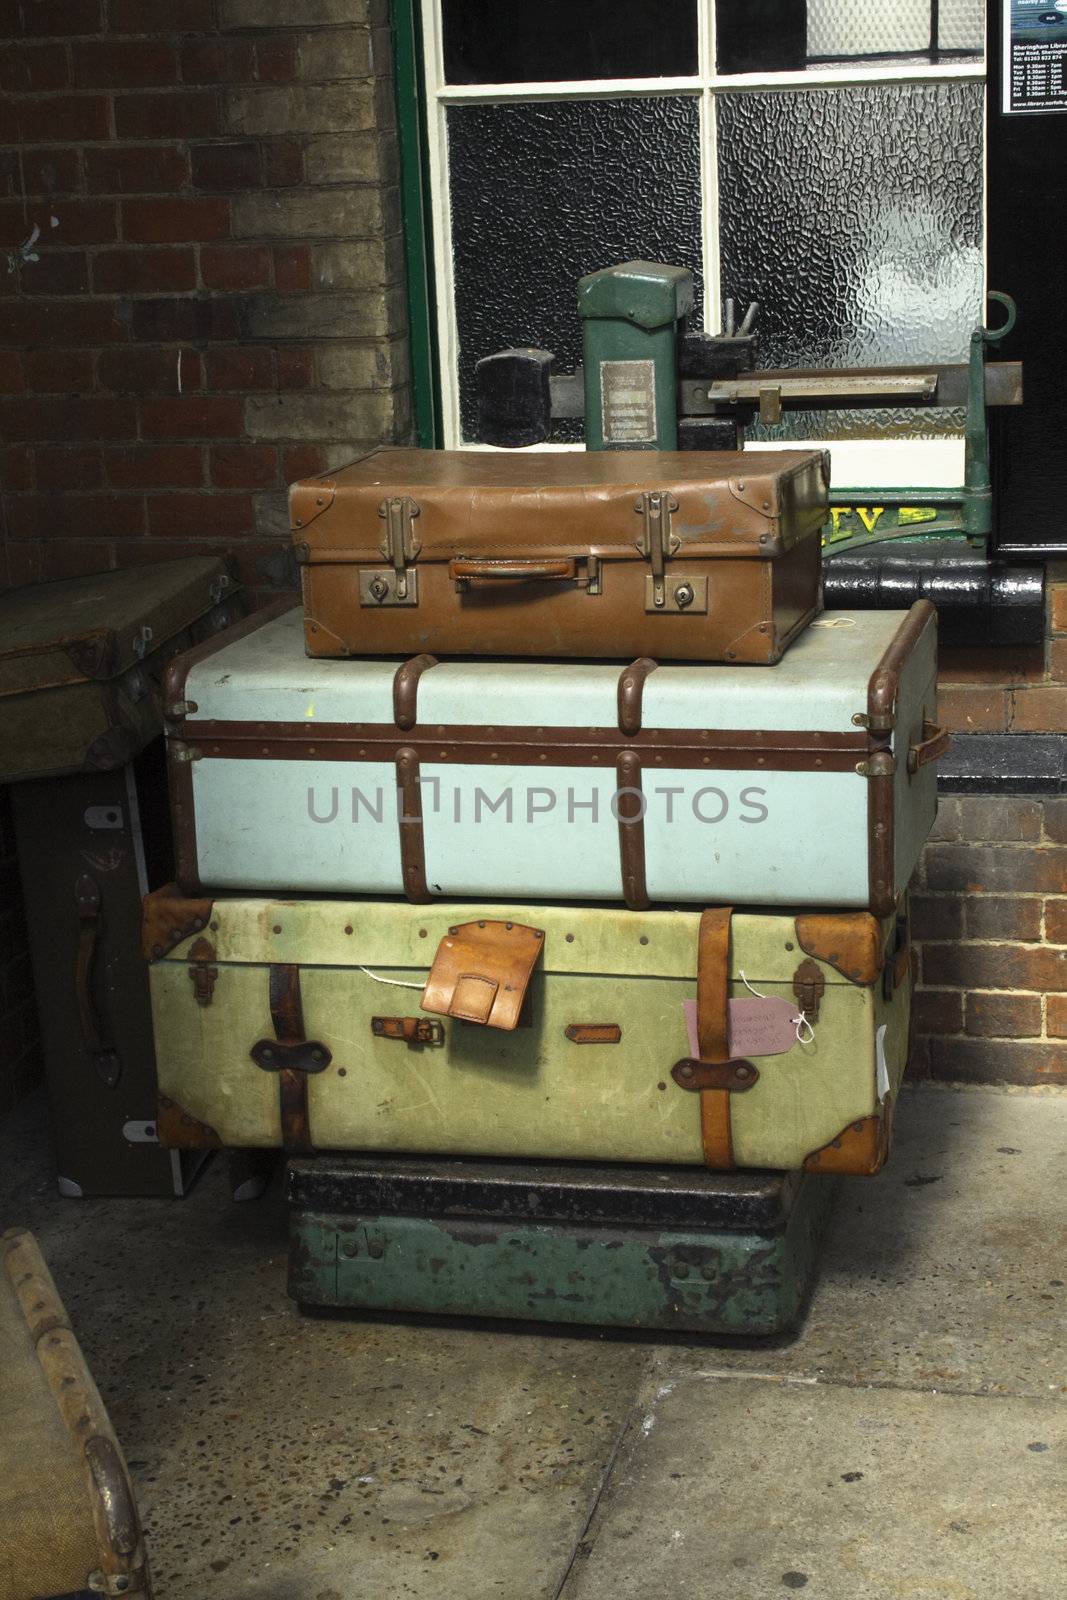 cases and old trunks on scales at a railway station